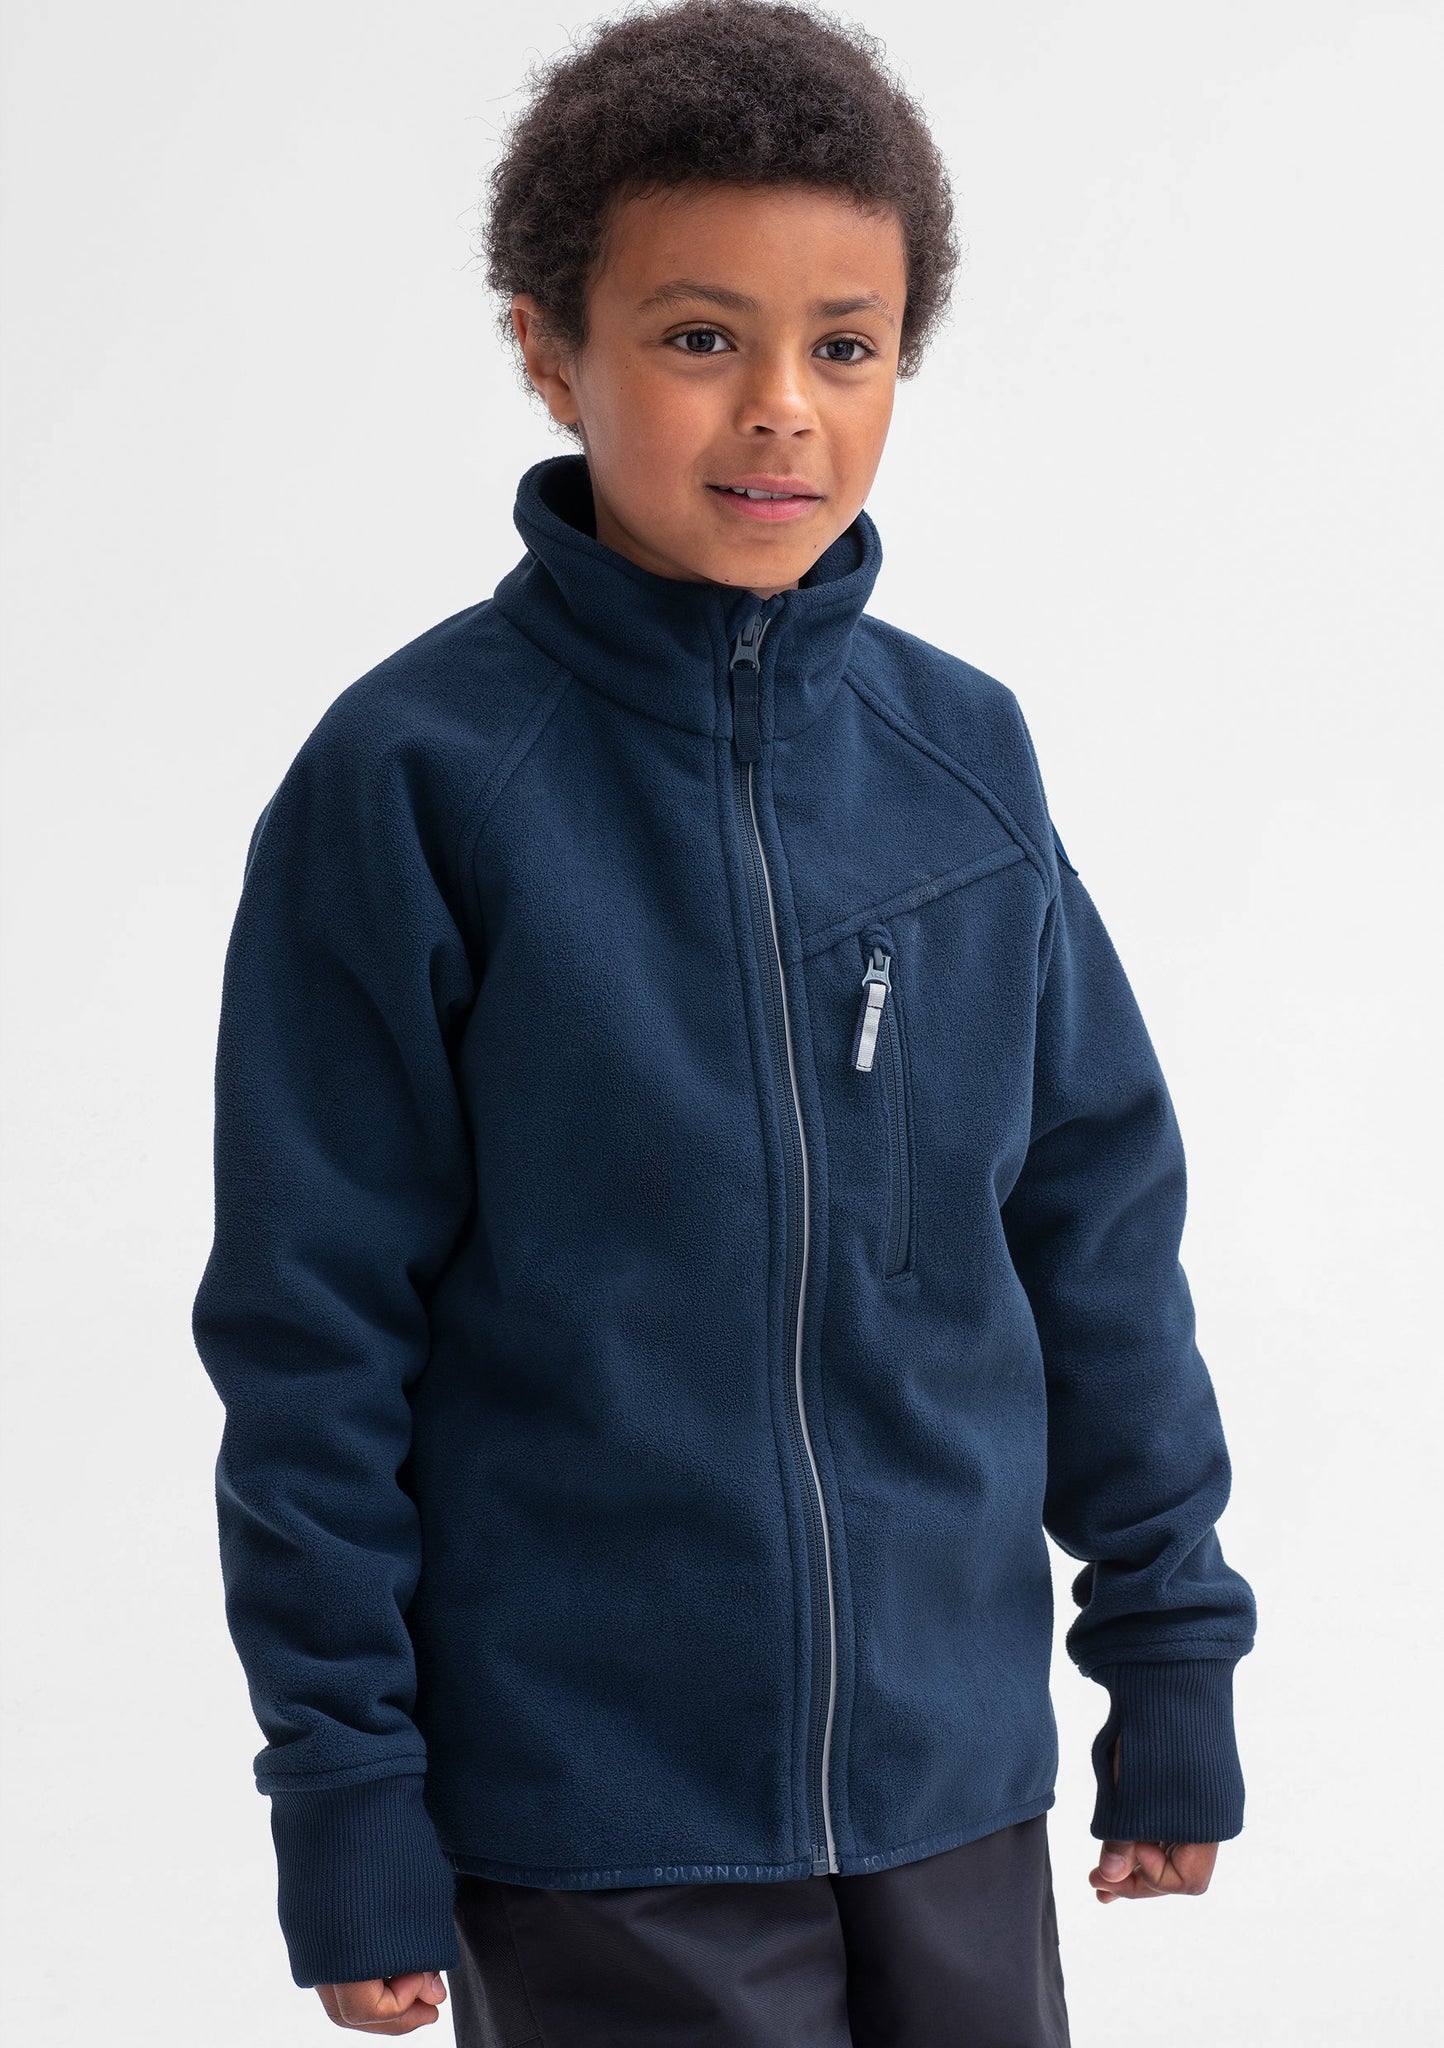 A boy wearing a navy, kids fleece jacket with reflectors on zips, front pocket & cuff thumbholes, made of soft fabric.